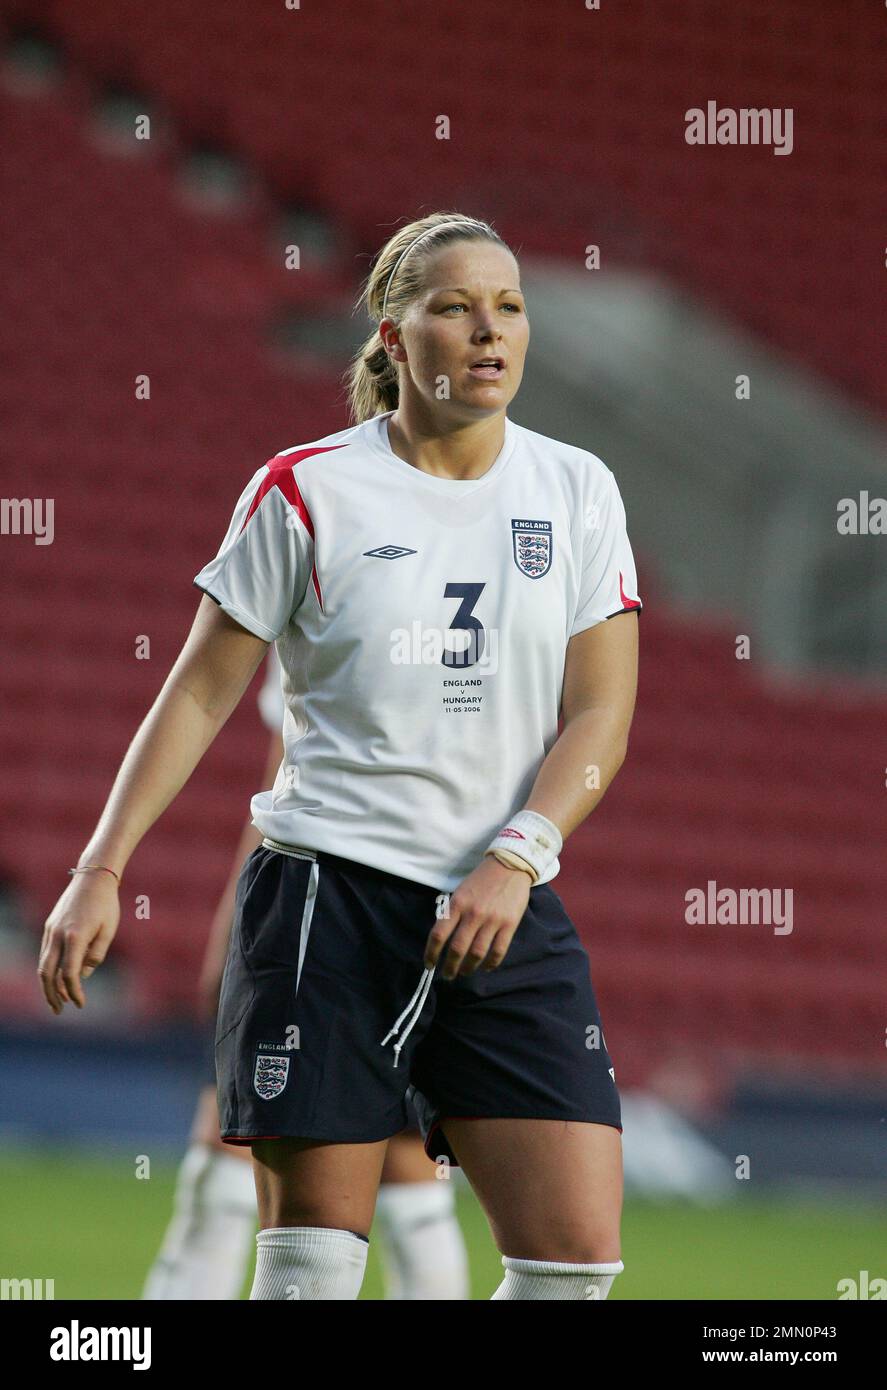 England v Hungary Women's football 2006 World Cup Qualifier  at St Marys stadium Southampton. England's Rachel Unitt in action.  image is bound by Dataco restrictions on how it can be used. EDITORIAL USE ONLY No use with unauthorised audio, video, data, fixture lists, club/league logos or “live” services. Online in-match use limited to 120 images, no video emulation. No use in betting, games or single club/league/player publications Stock Photo